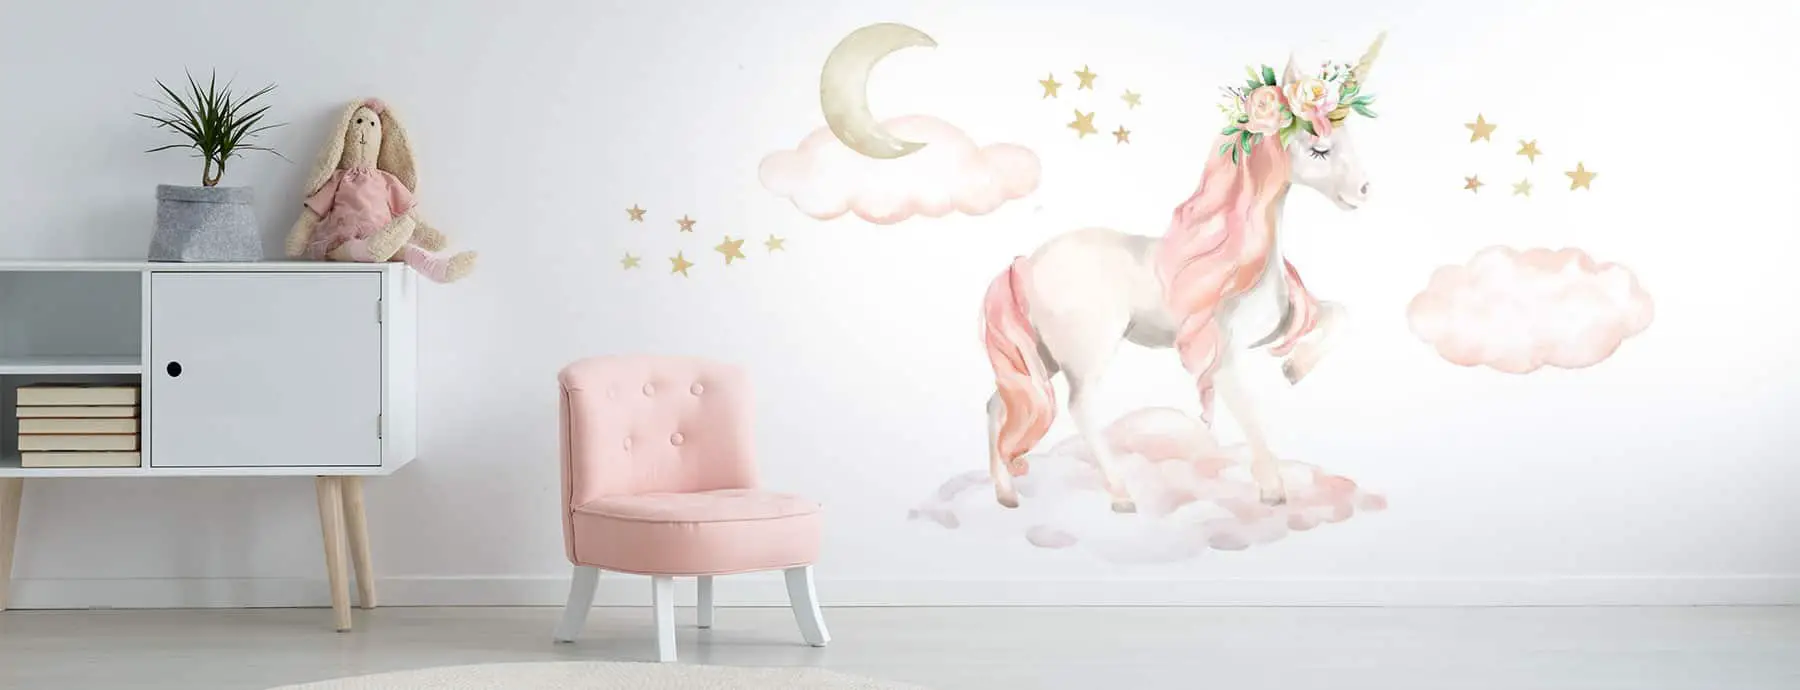 2 Sheets Large Size Unicorn Wall Decor,Removable Unicorn Wall Decals Stickers $） 